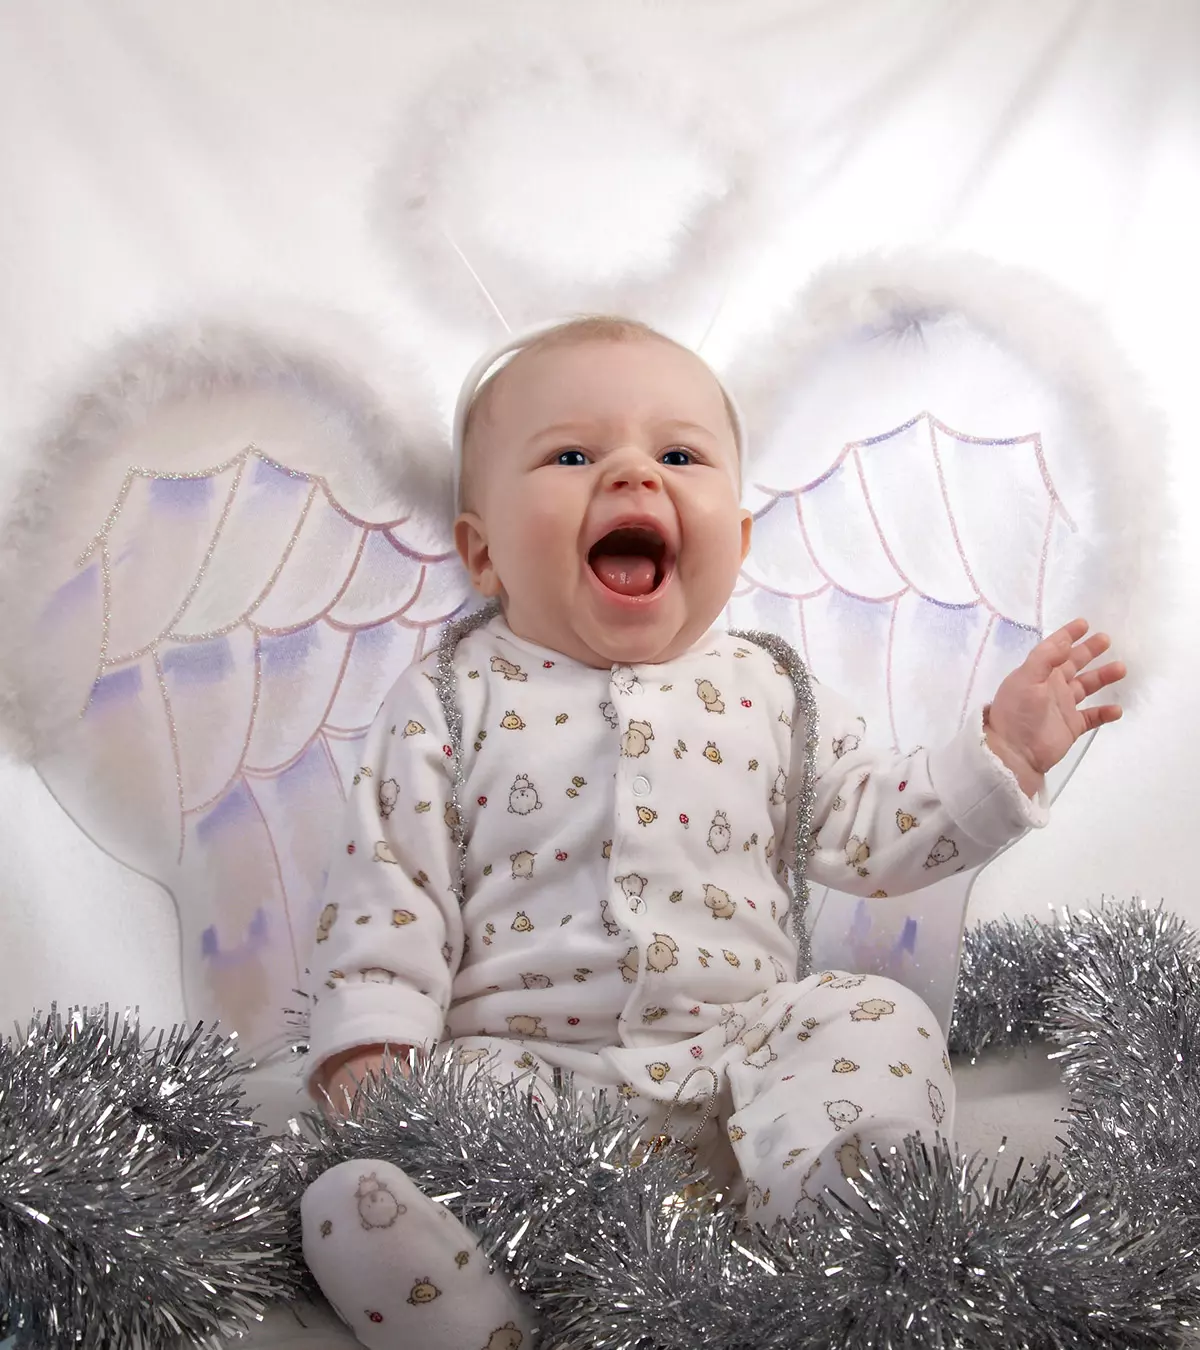 50 Majestic Baby Names That Mean Miracle Or Blessing